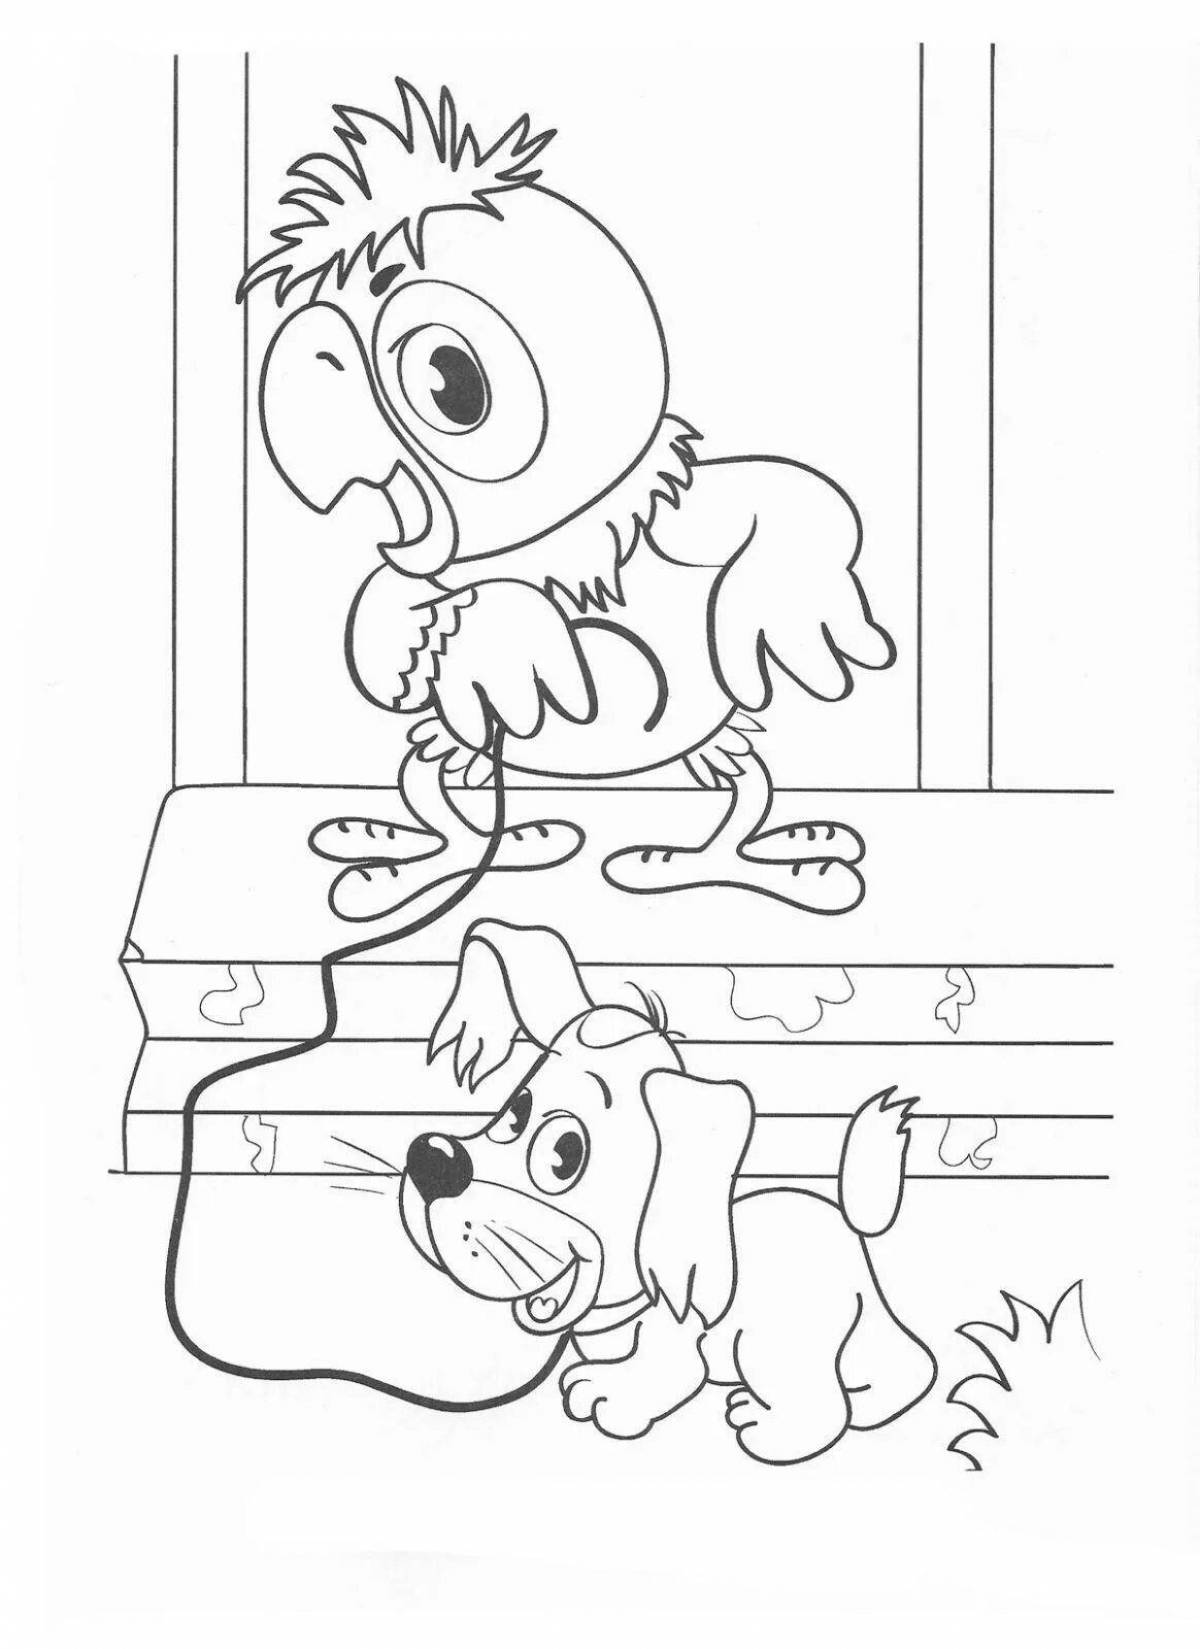 Cache of colorful coloring pages